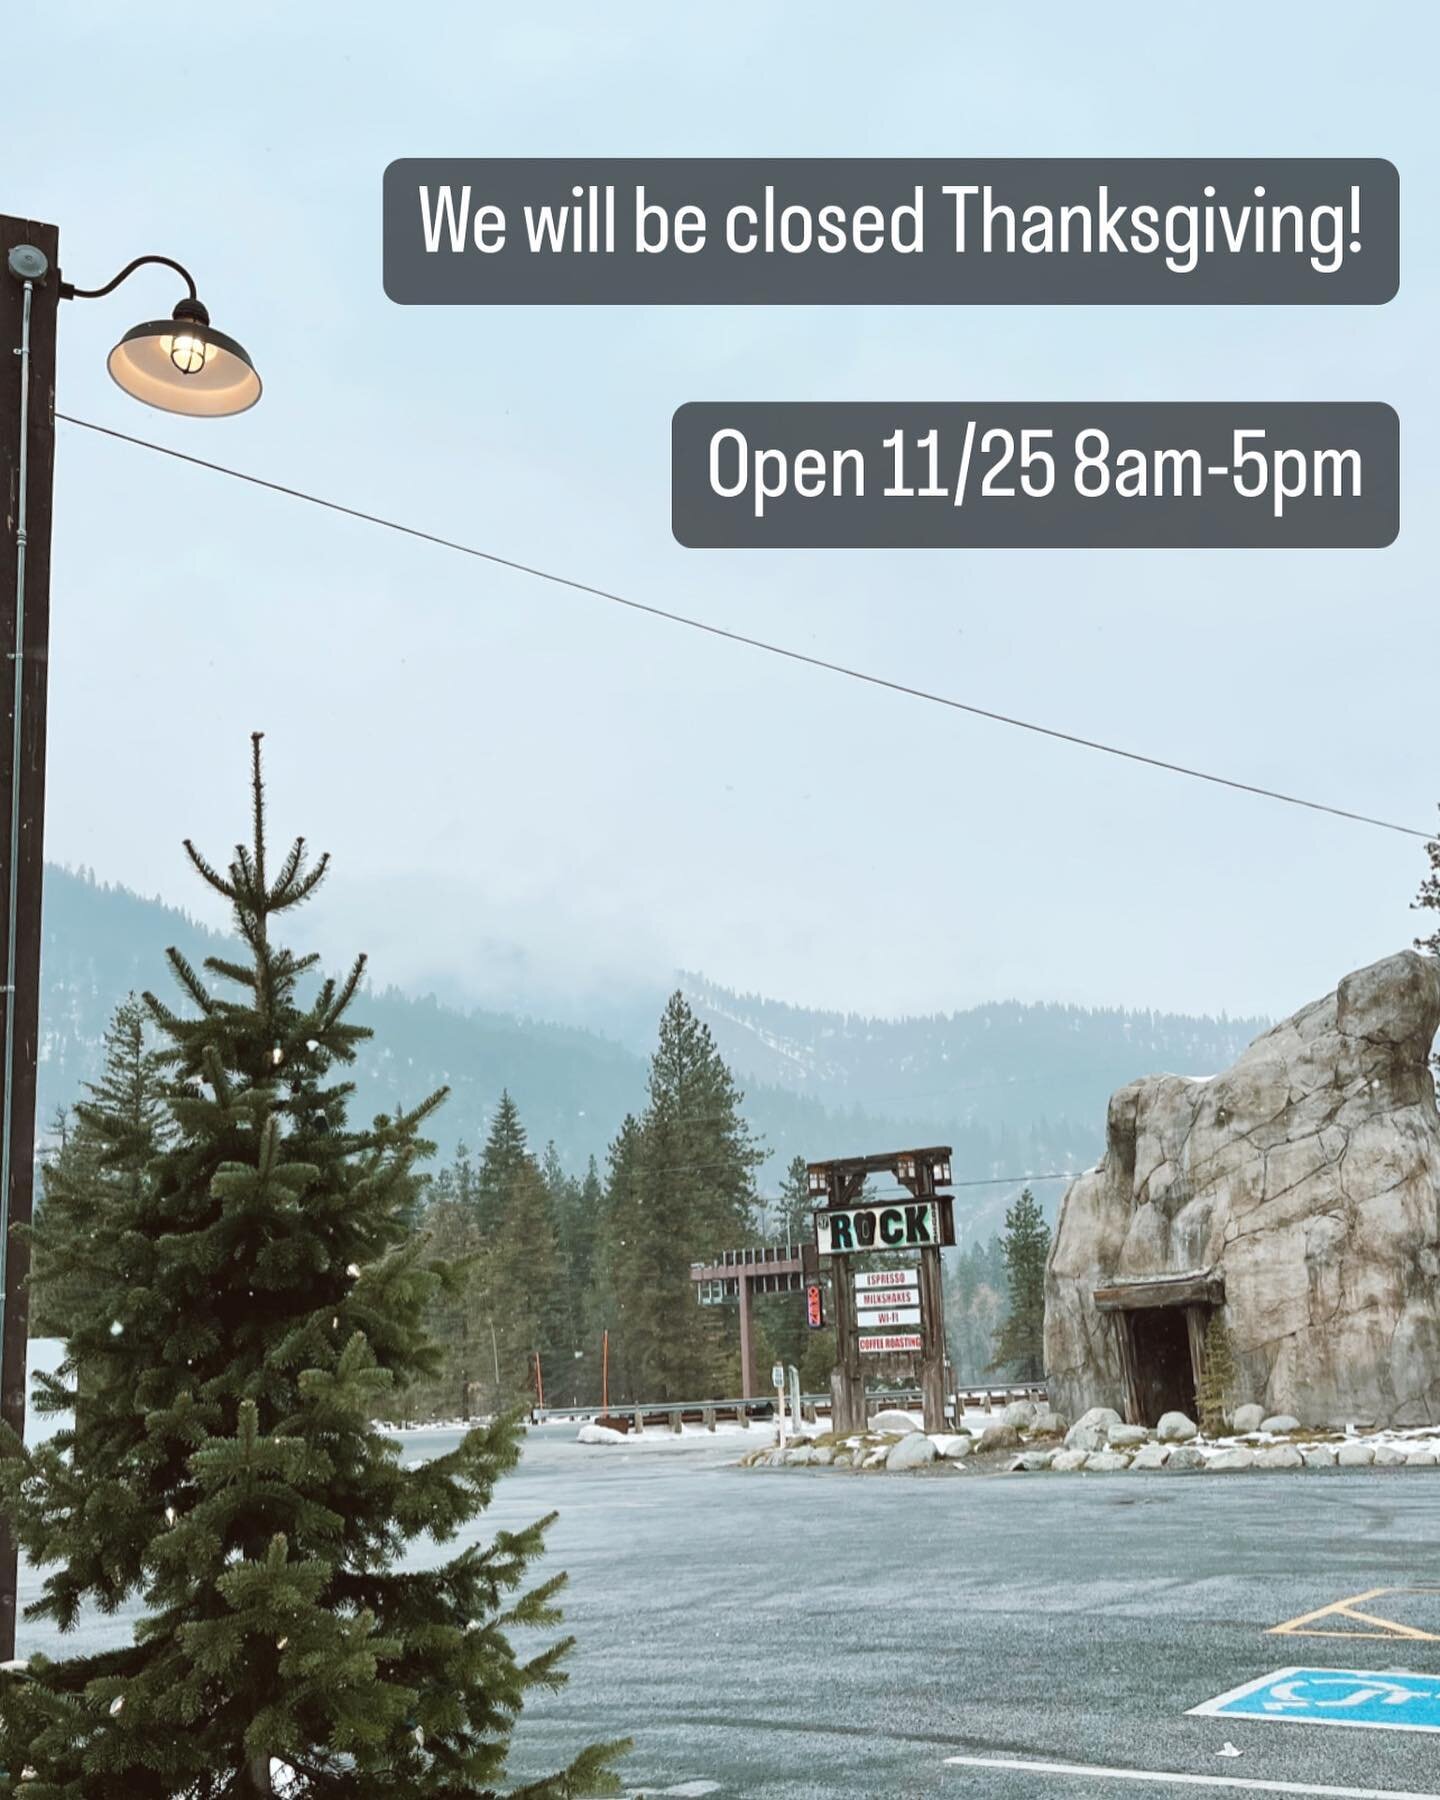 We will be closed Thanksgiving! 

Regular store hours with resume 11/25 8am-5pm.